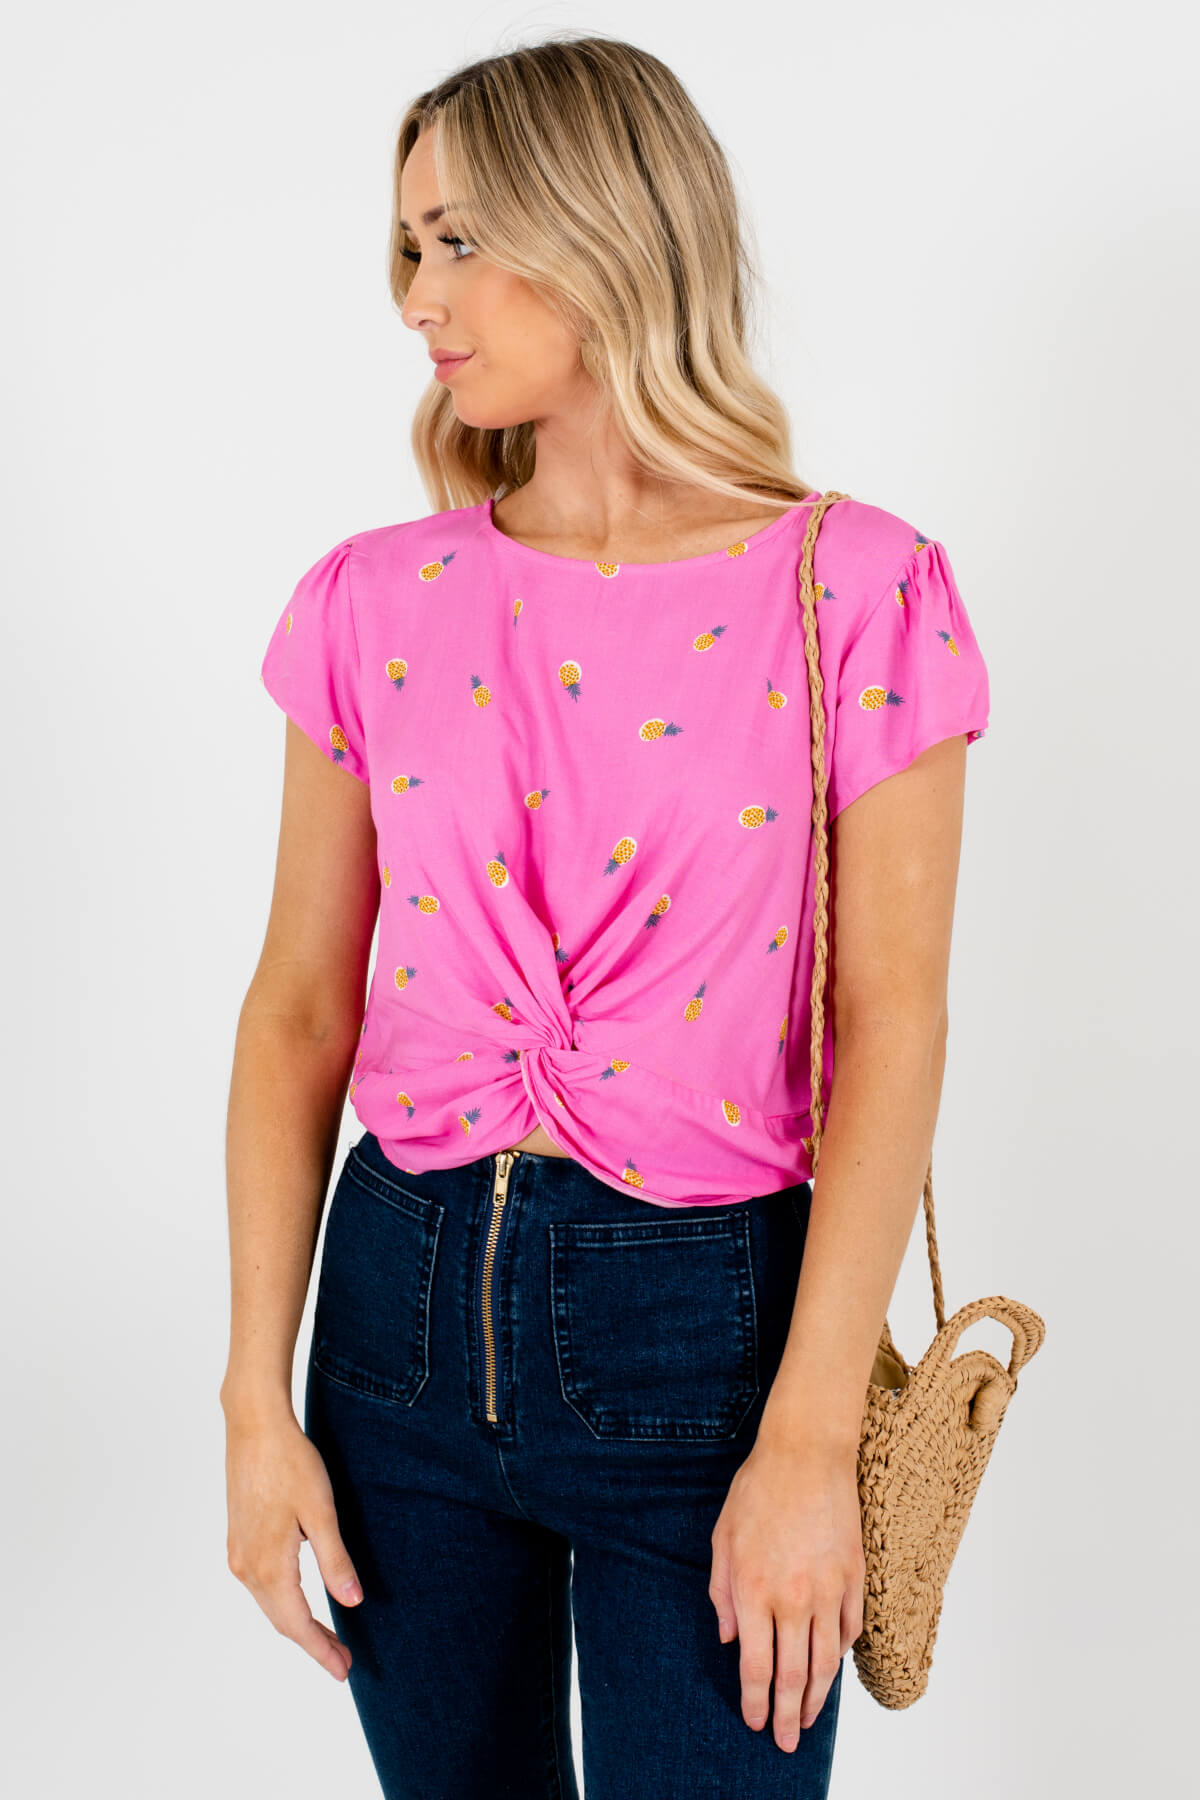 Pink Patterned Cute and Comfortable Boutique Tops for Women